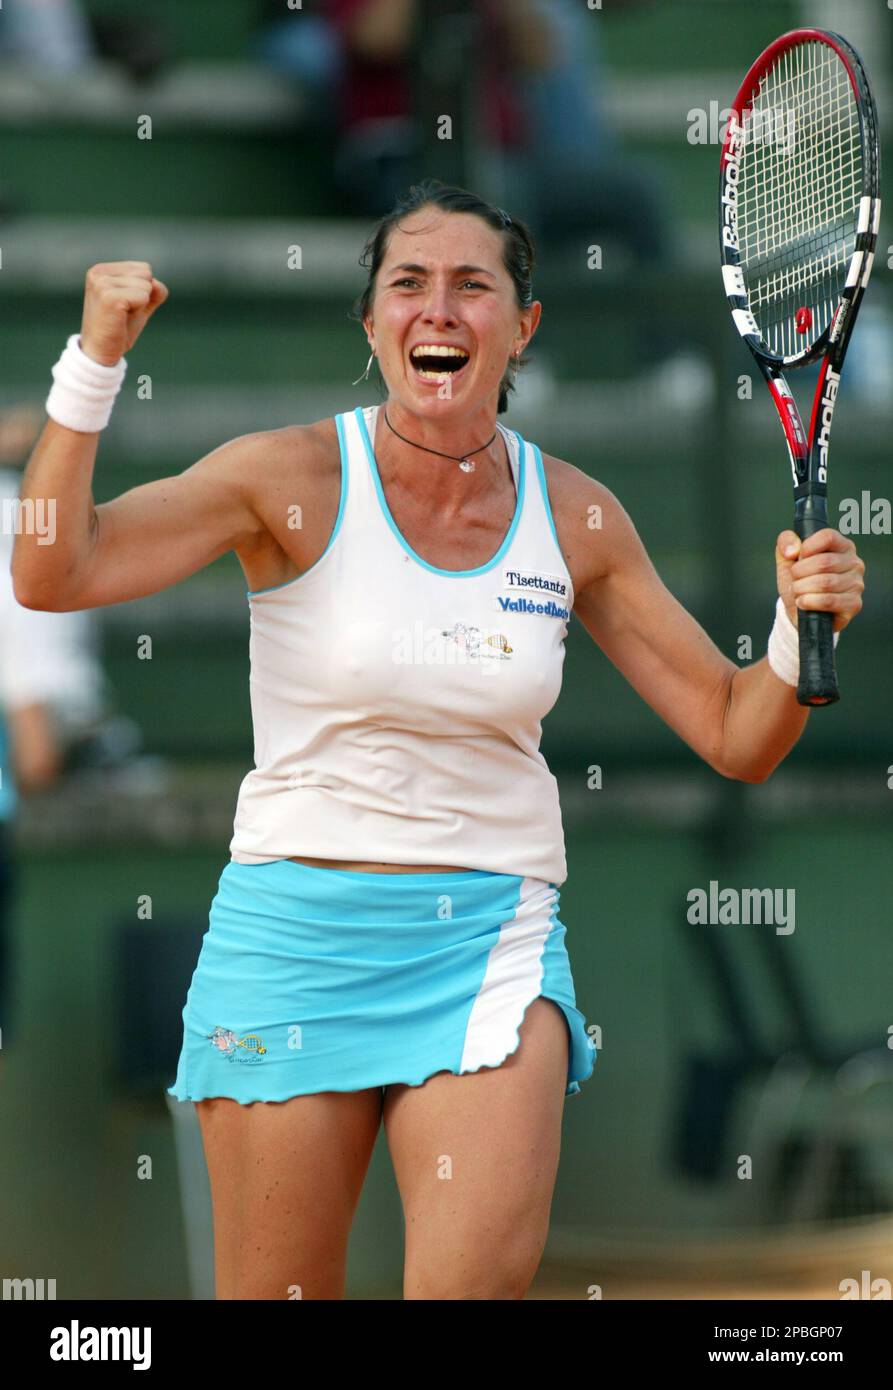 Italy's Nathalie Vierin celebrates after defeating Russia's Galina  Voskoboeva during the Rome Masters tennis tournament in Rome's Foro Italico  clay-court, Wednesday, May 16, 2007. Vierin won 4-6, 6-4, 6-4. (AP  Photo/Felice Calabro'